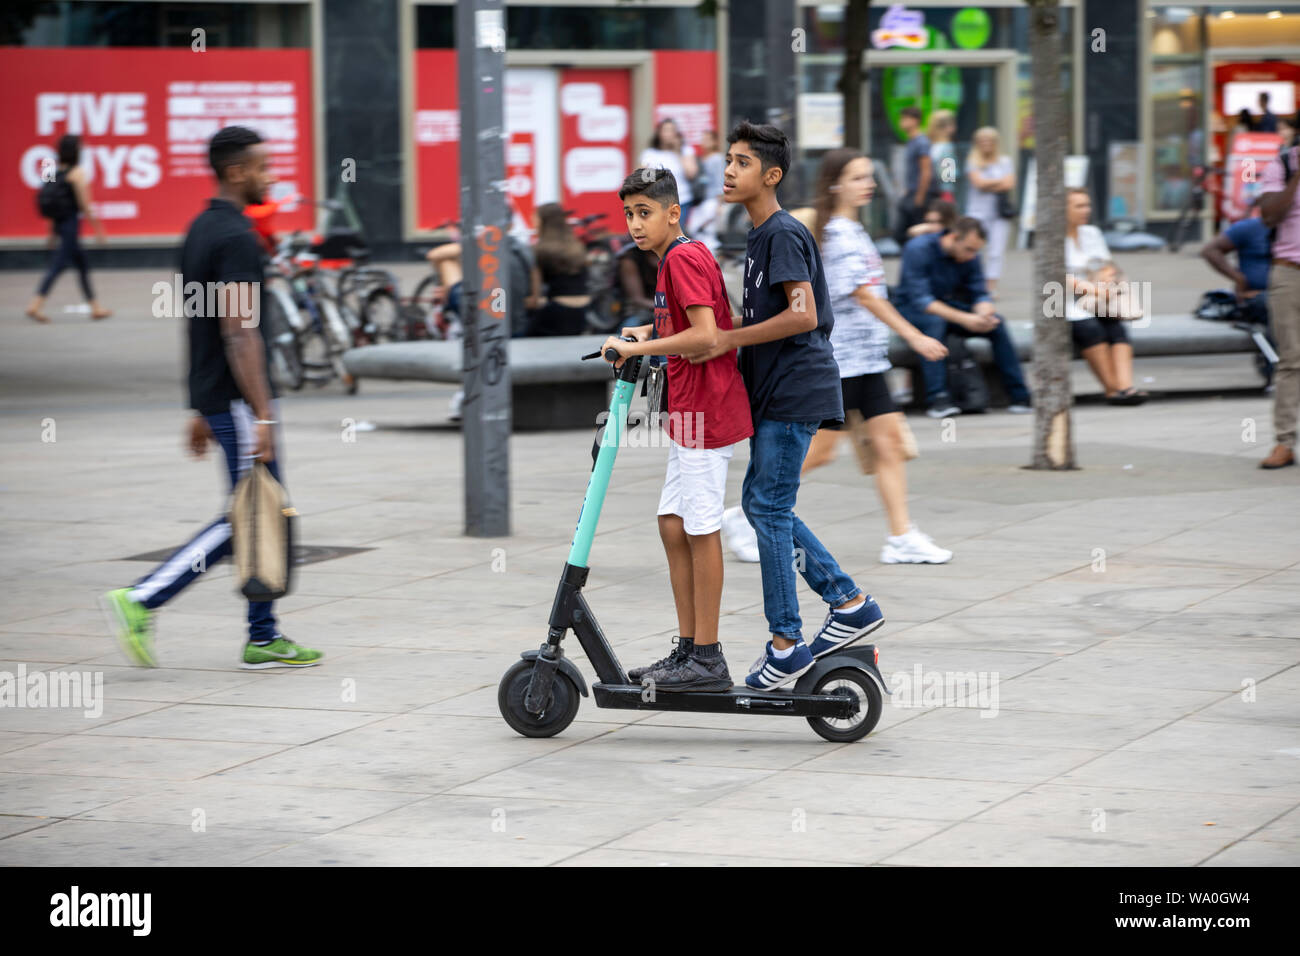 E-scooter, electric scooter, rental scooter, driving, at Alexander Platz,  in Berlin, tow people on one scooter Stock Photo - Alamy